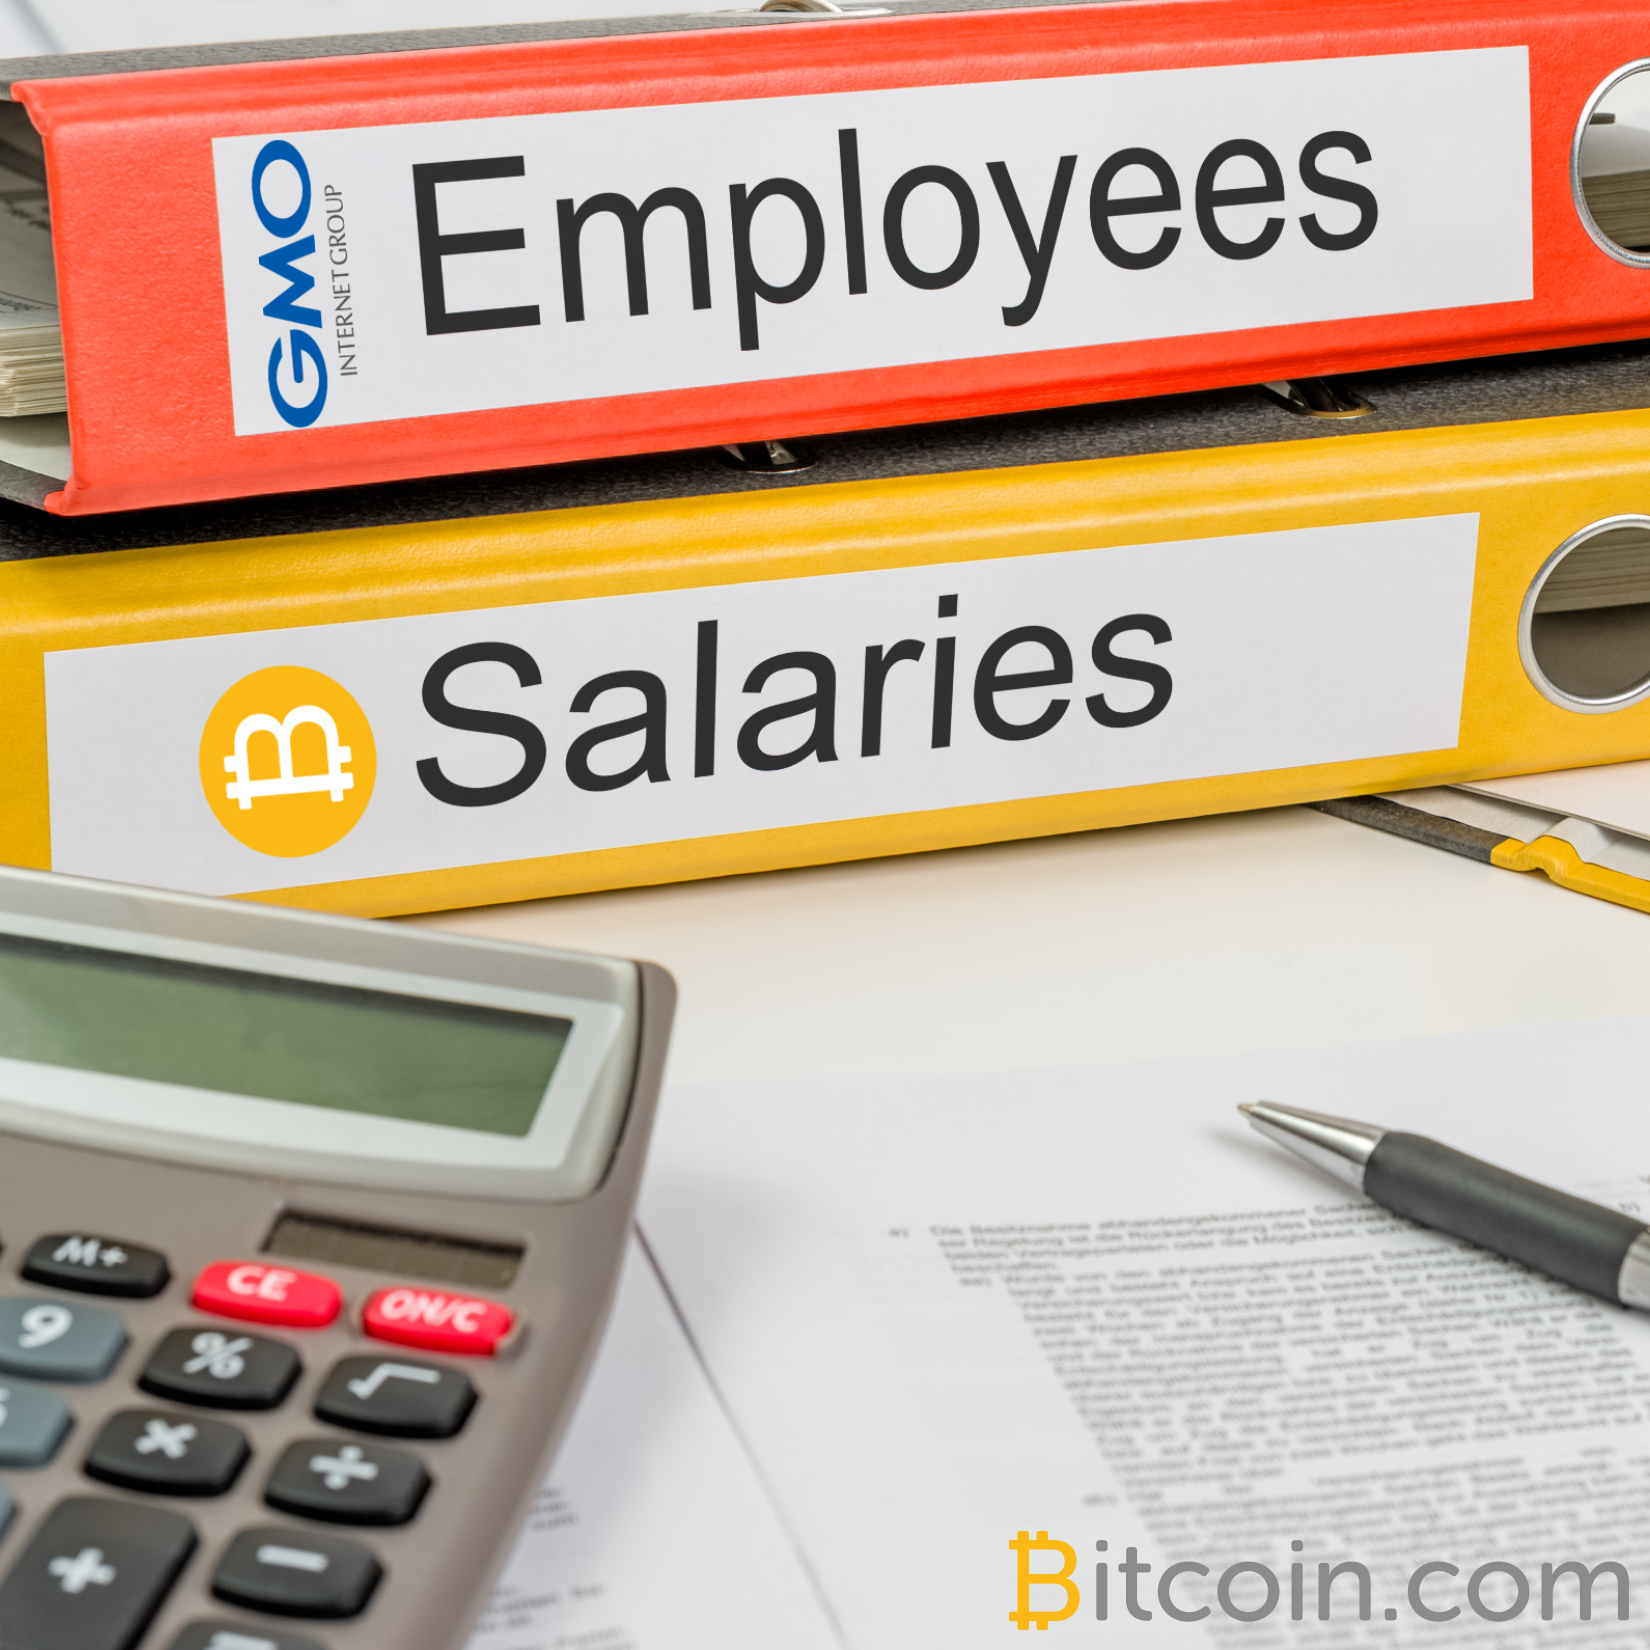 Japanese Internet Giant GMO Offers to Pay 4700+ Employees in Bitcoin